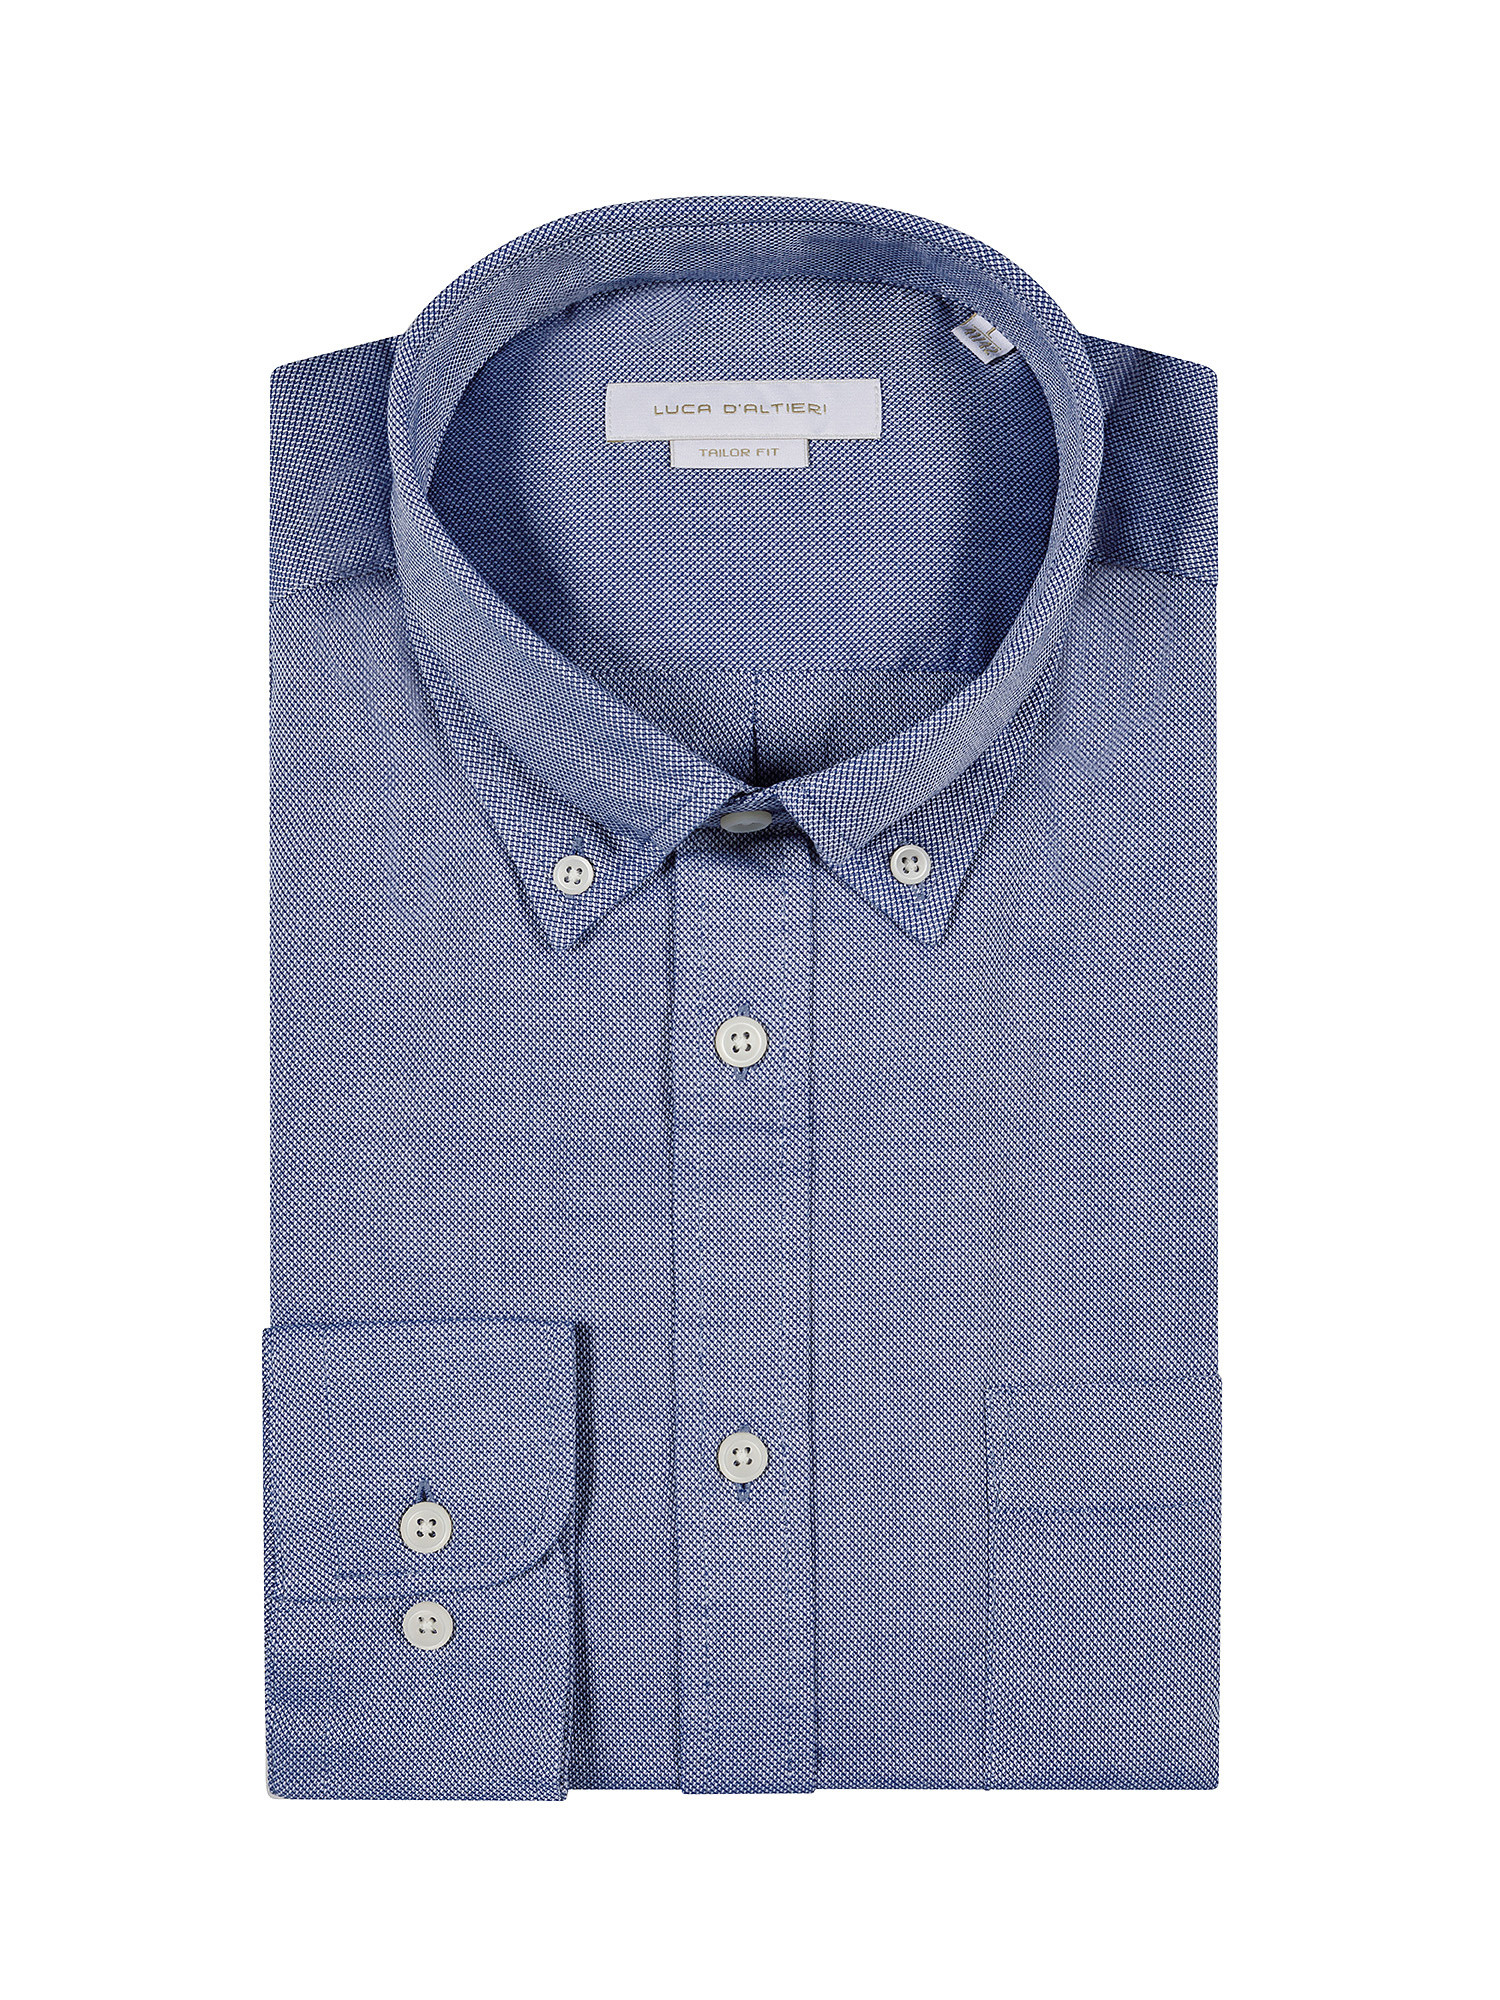 Camicia tailor fit in tessuto Oxford, Blu, large image number 2